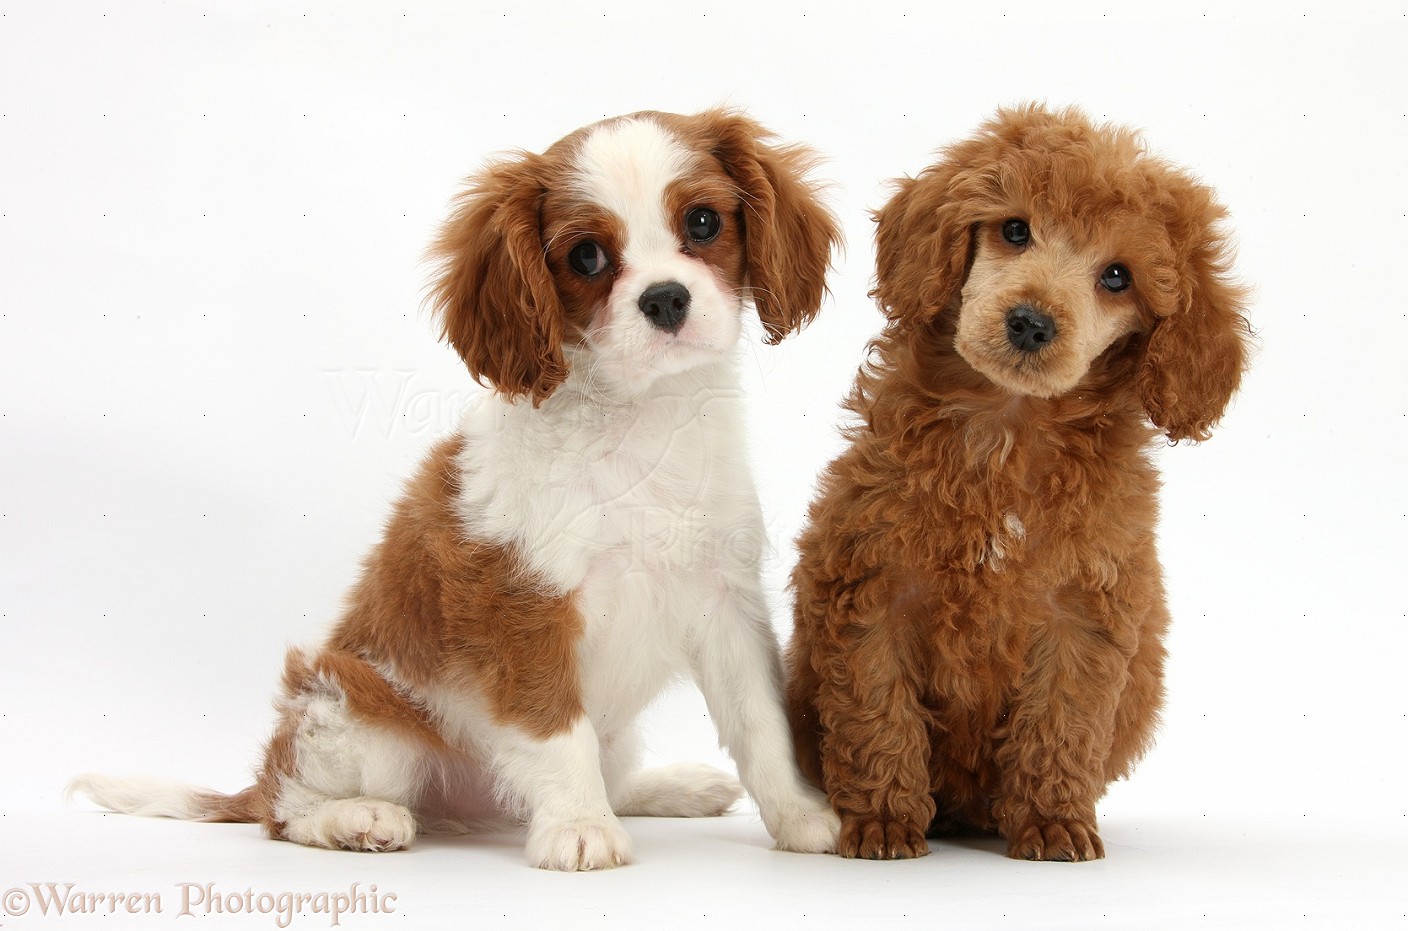 Dogs King Charles Pup With Poodle Pup Photo Wp28300